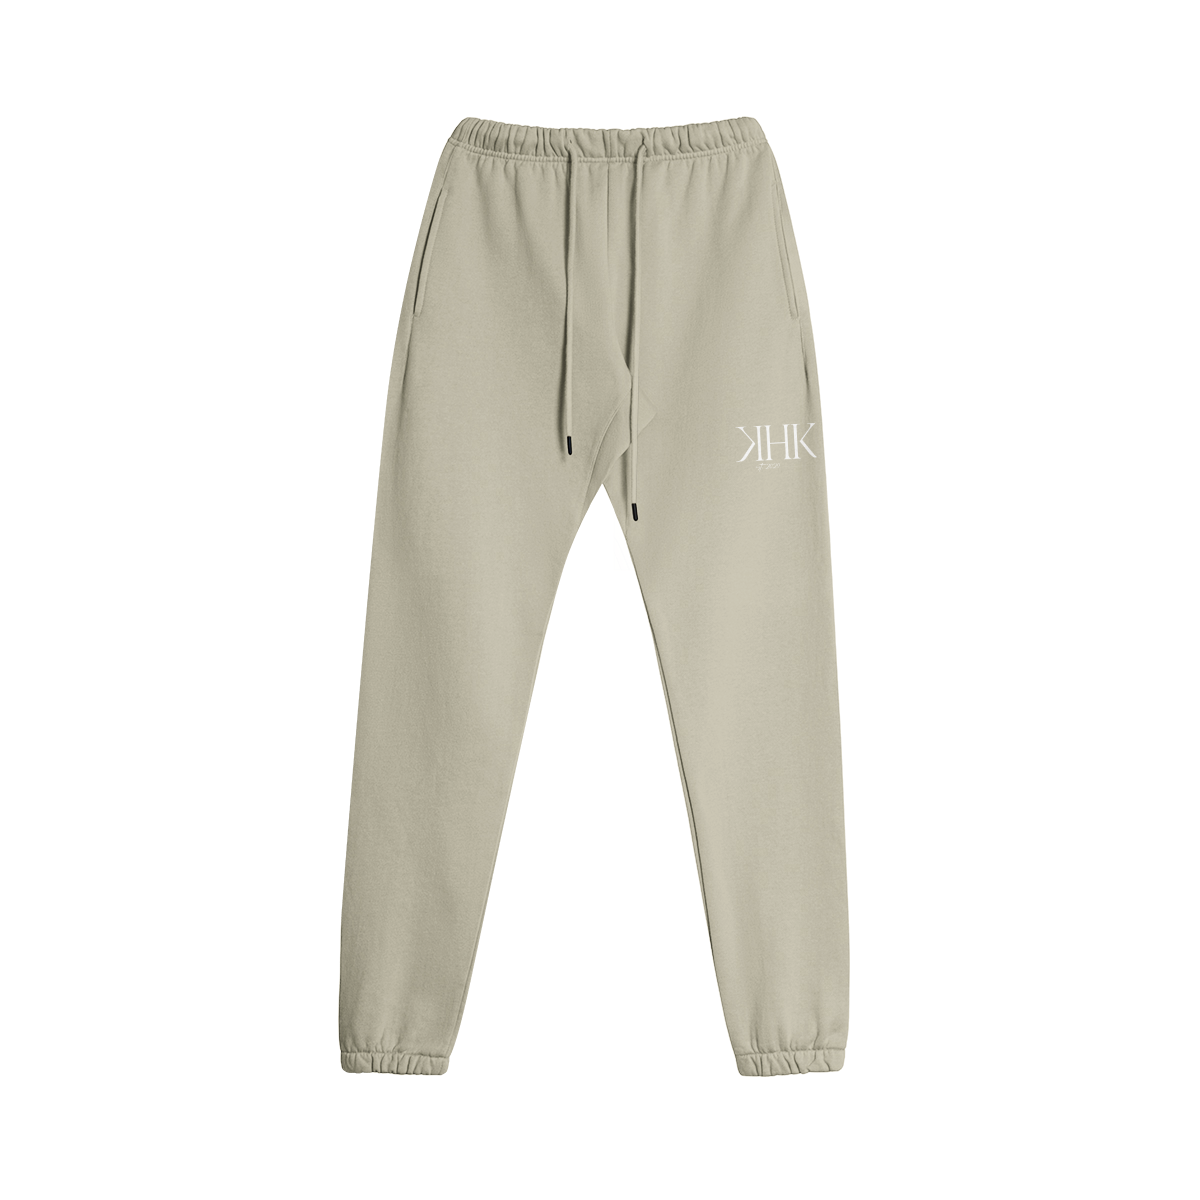 "NEW" Today, Tomorrow, The Next Day" Jogger Set